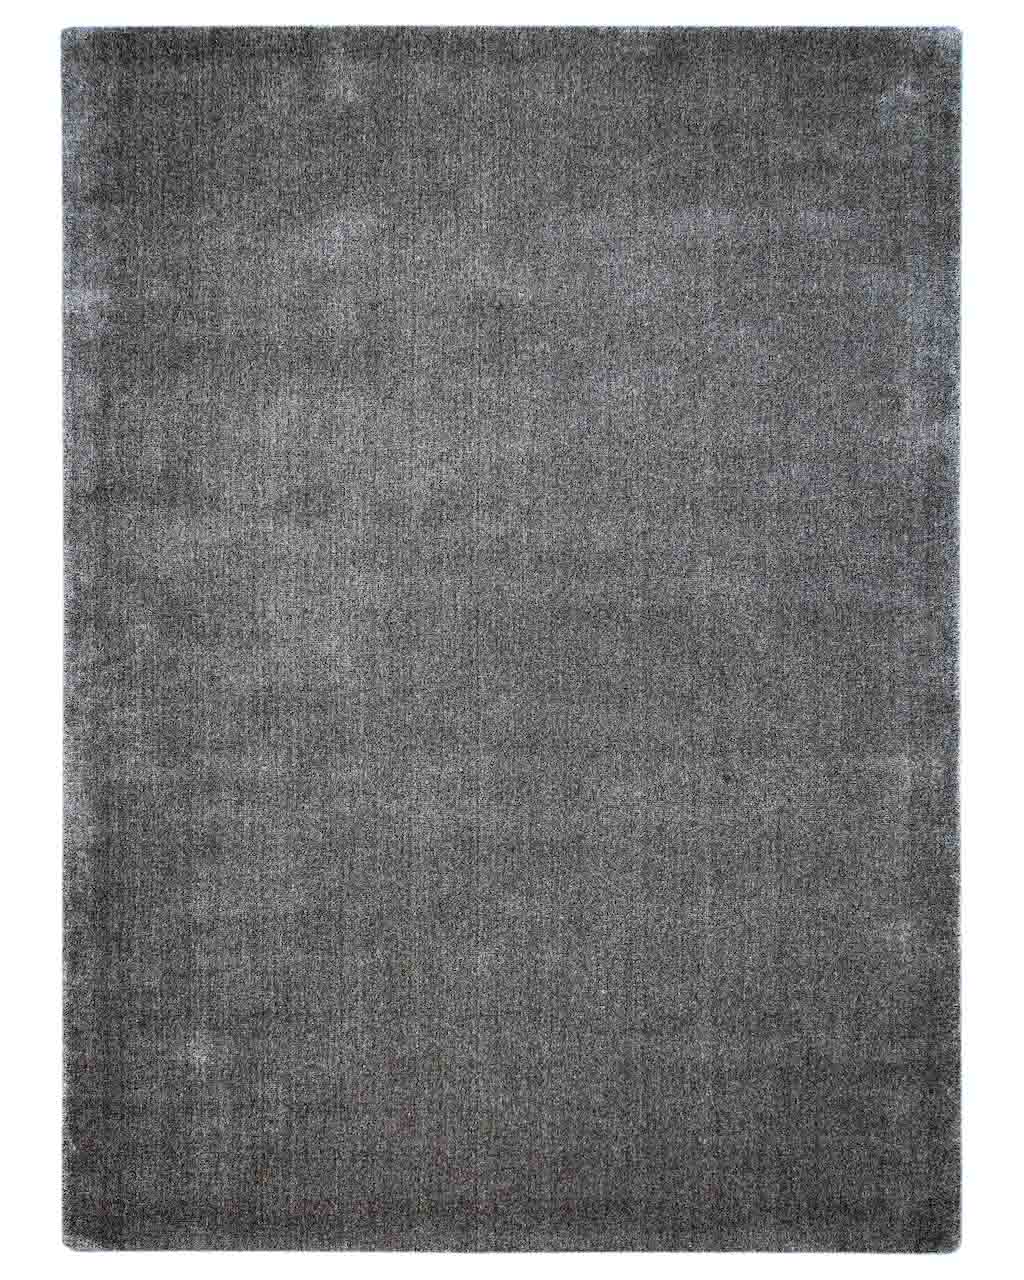 Casterley Charcoal Rug